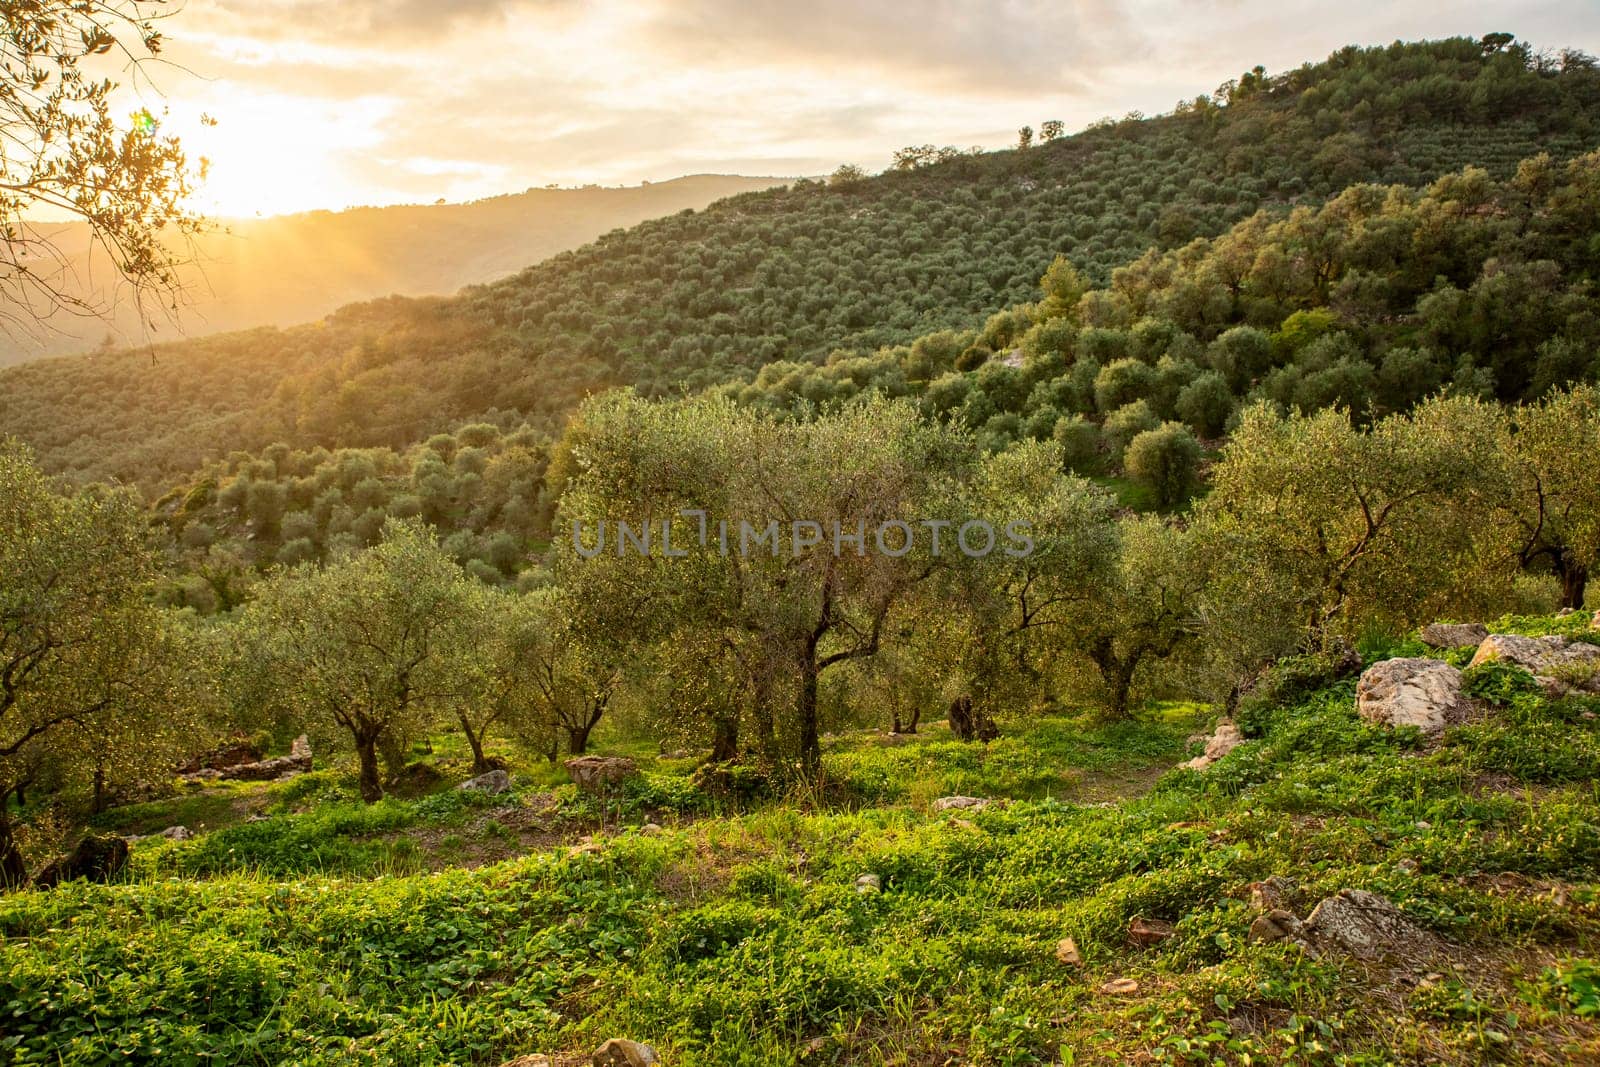 Ligurian olive trees are used to produce extra virgin olive oil.